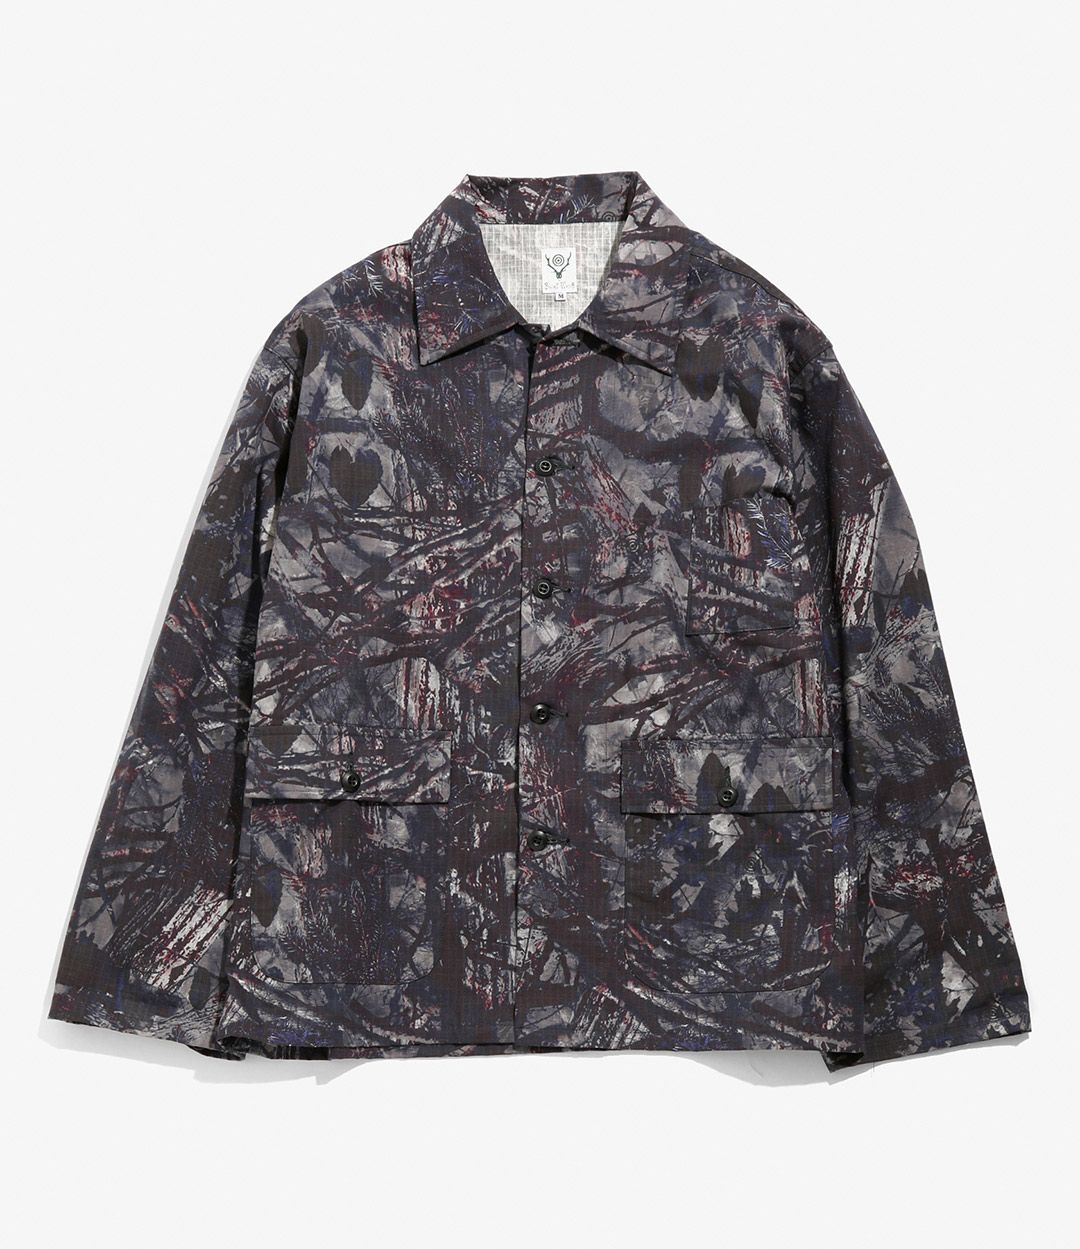 〈SOUTH2 WEST8〉プリントデザインが光るHUNTING SHIRT